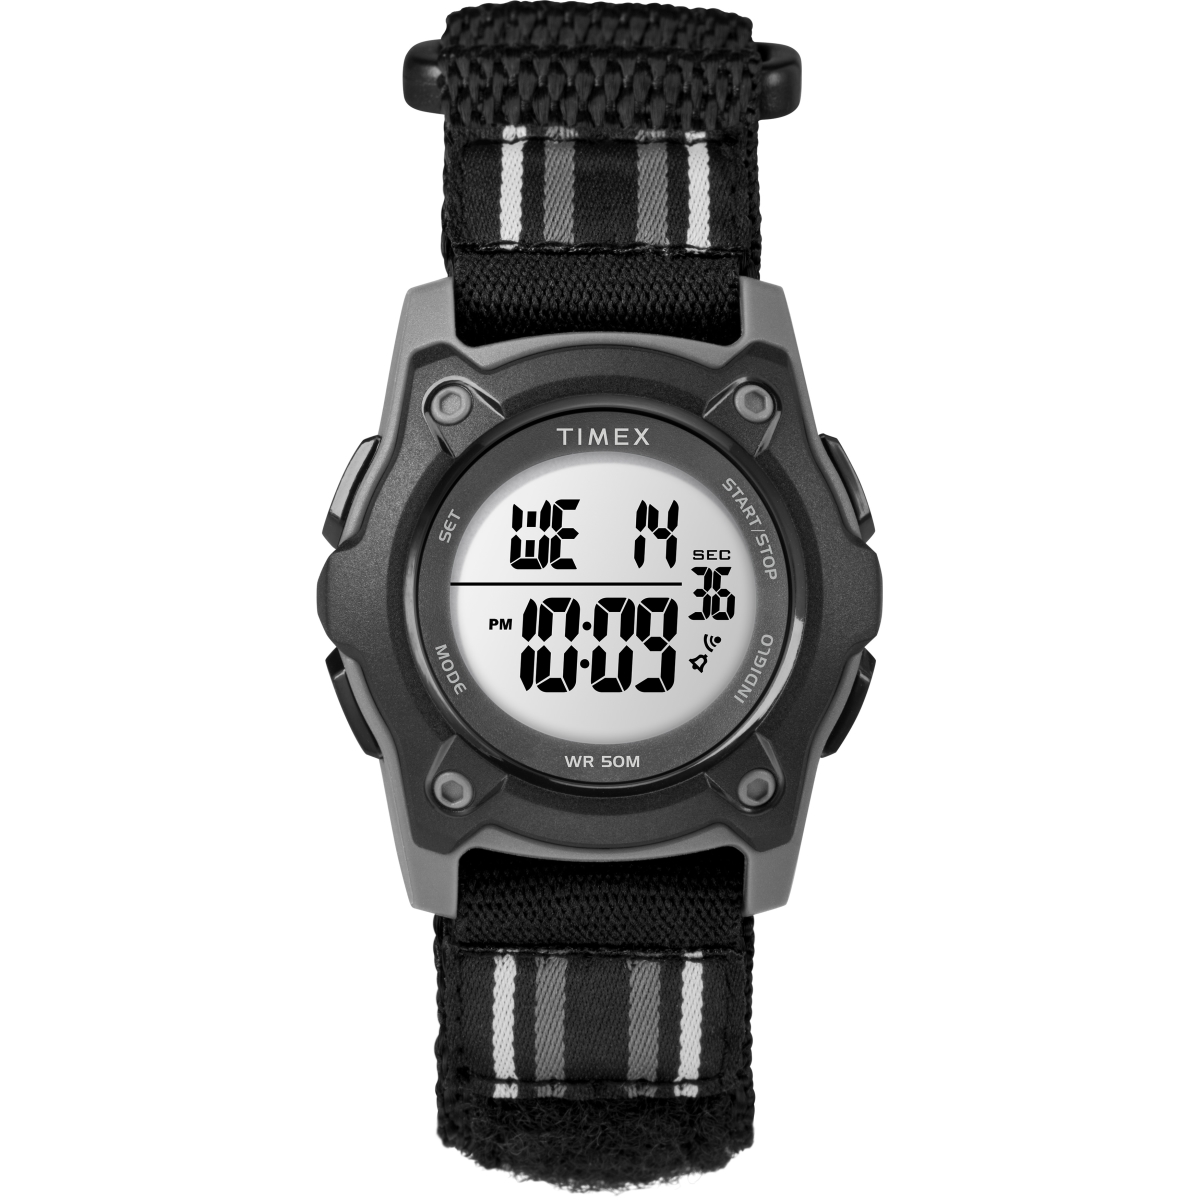 The Gem Collection 35 mm Time Machines Digital Double-Layered Fast Wrap Watch for Kids - Black & Gray